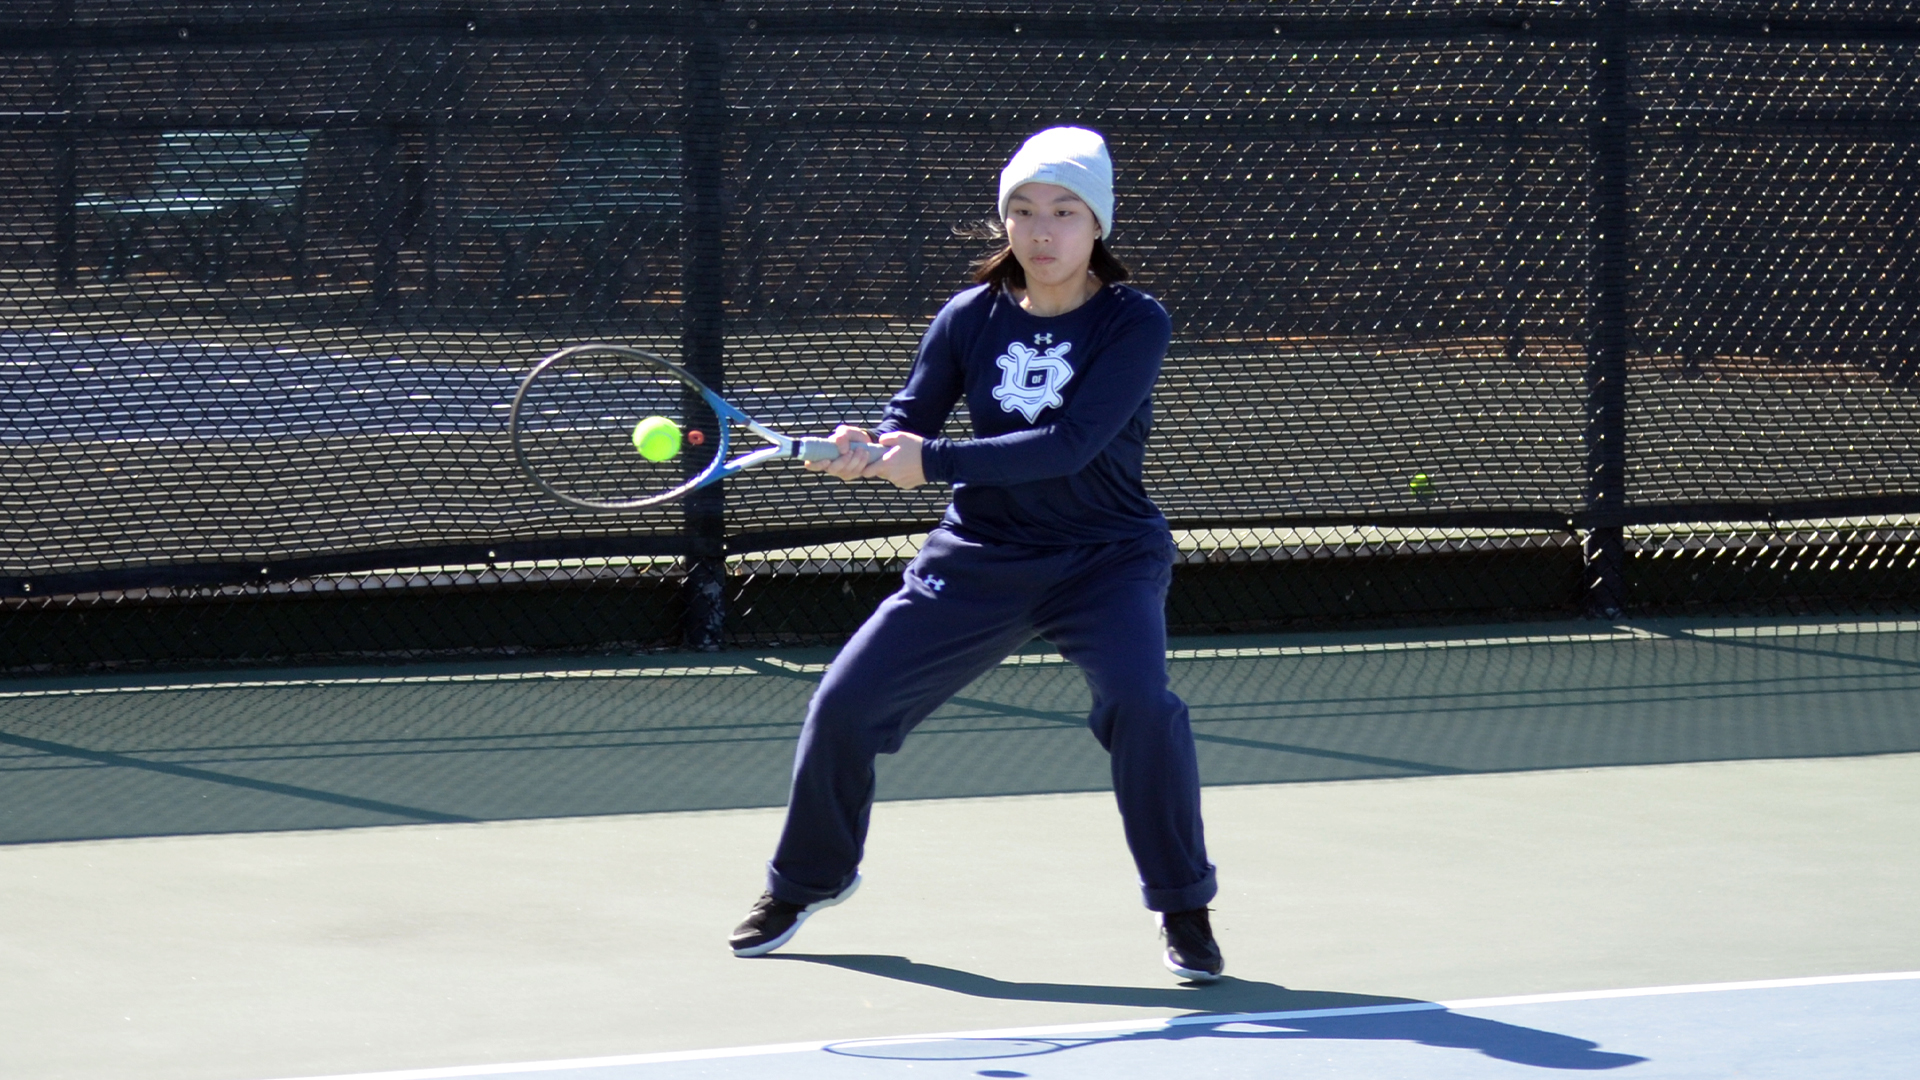 Women's Tennis Returns to UD for the First Time Since 2005